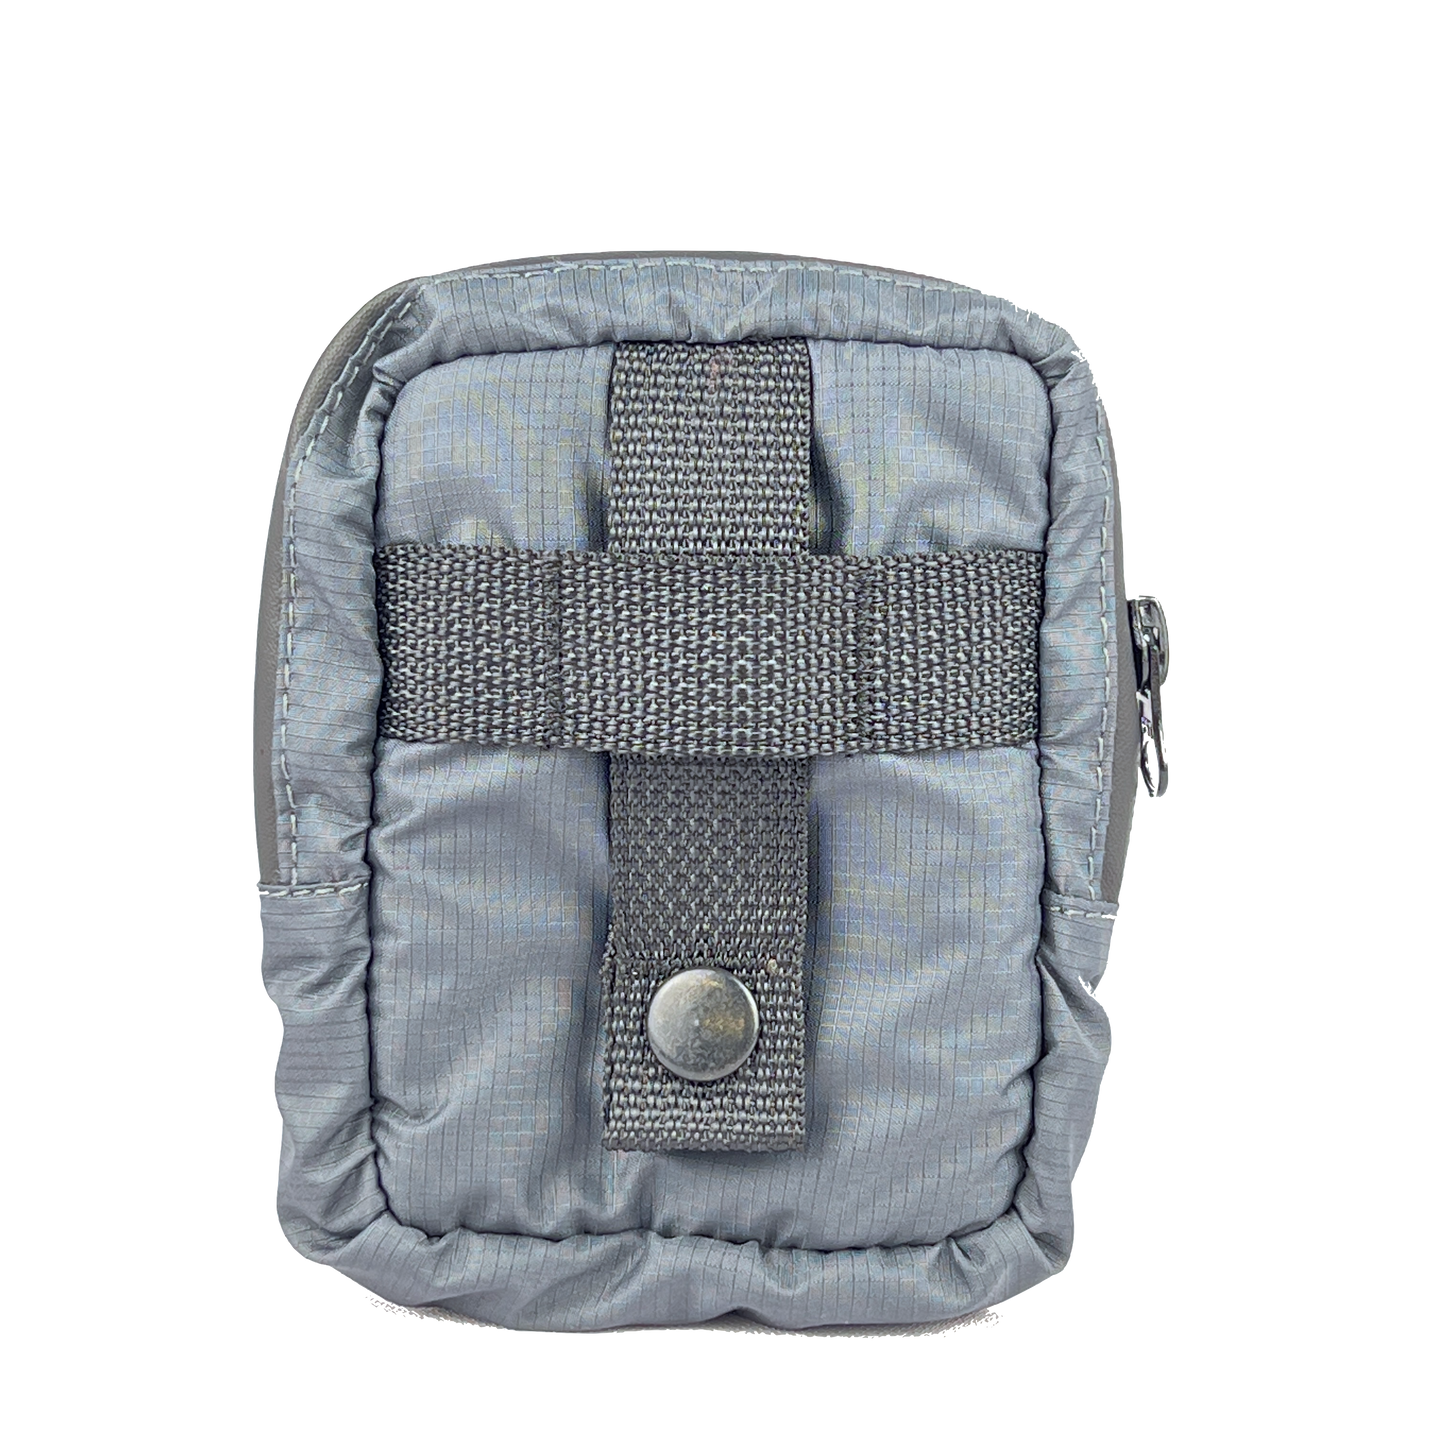 Fly box fishing pouch MOLLE 